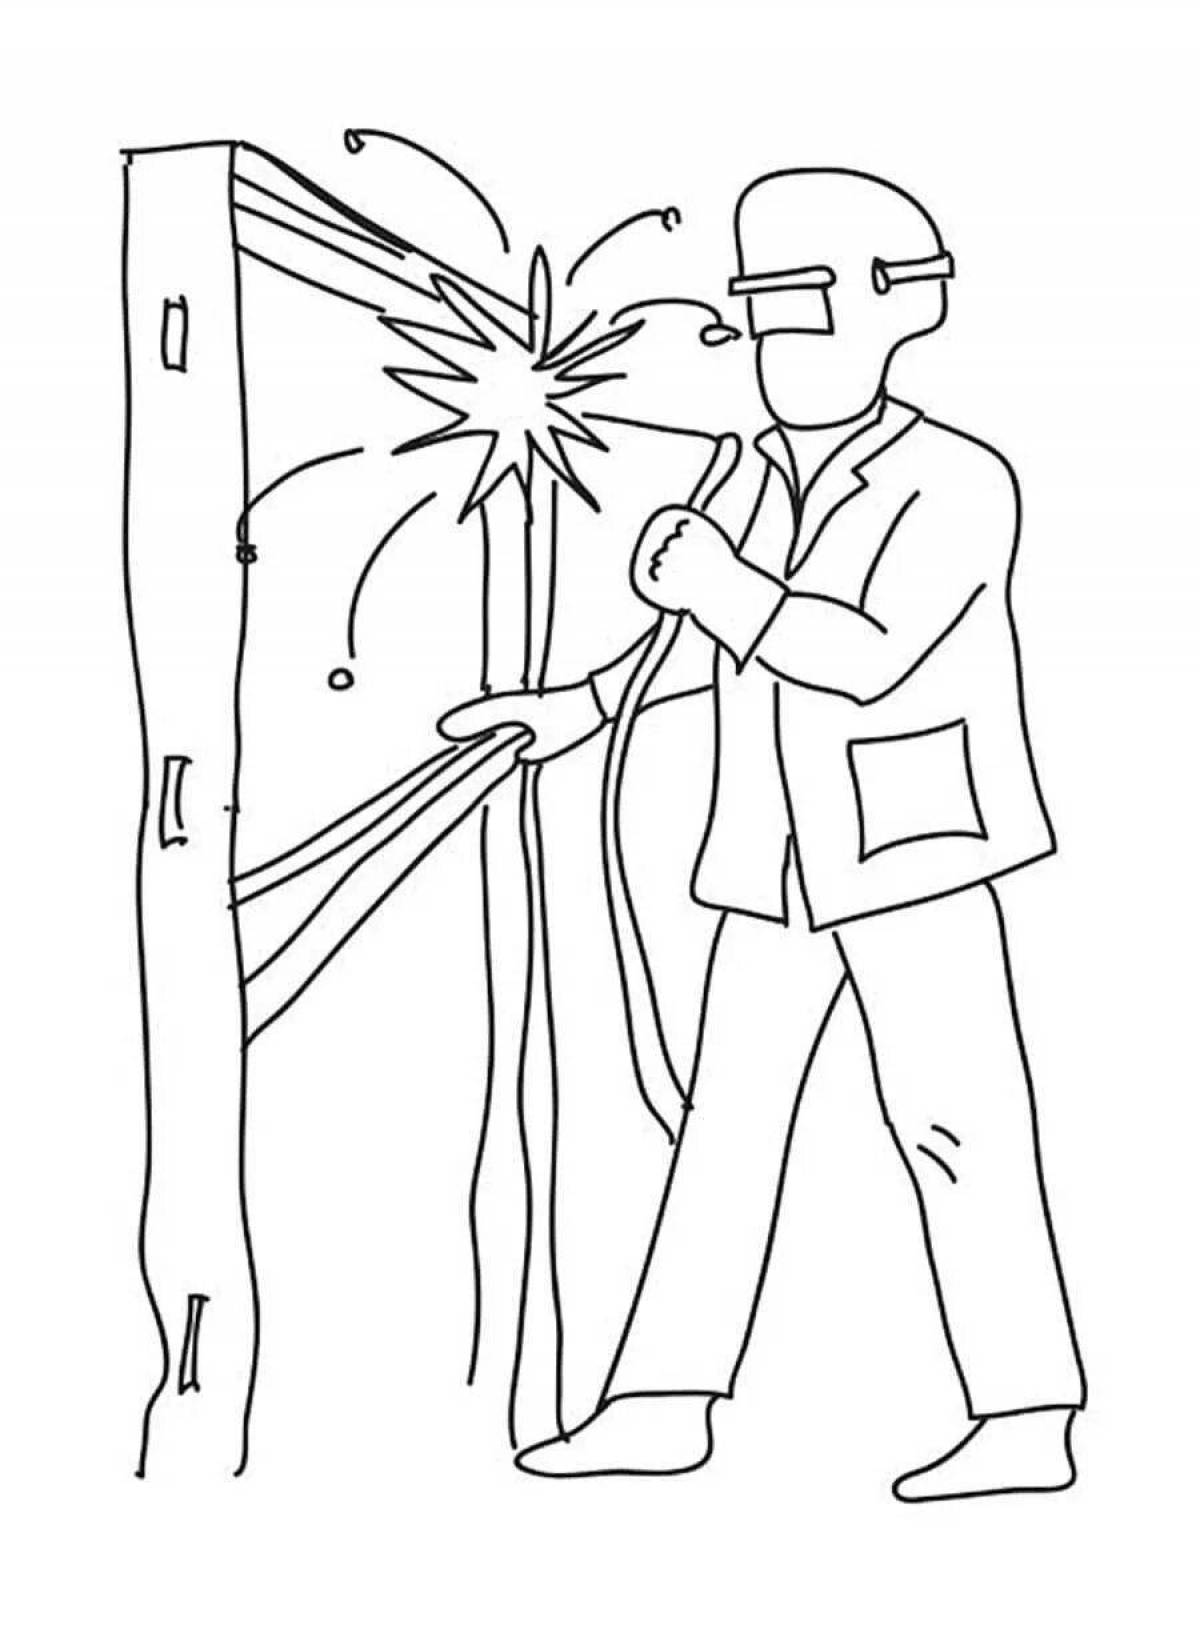 Outstanding Welder Coloring Page for Students